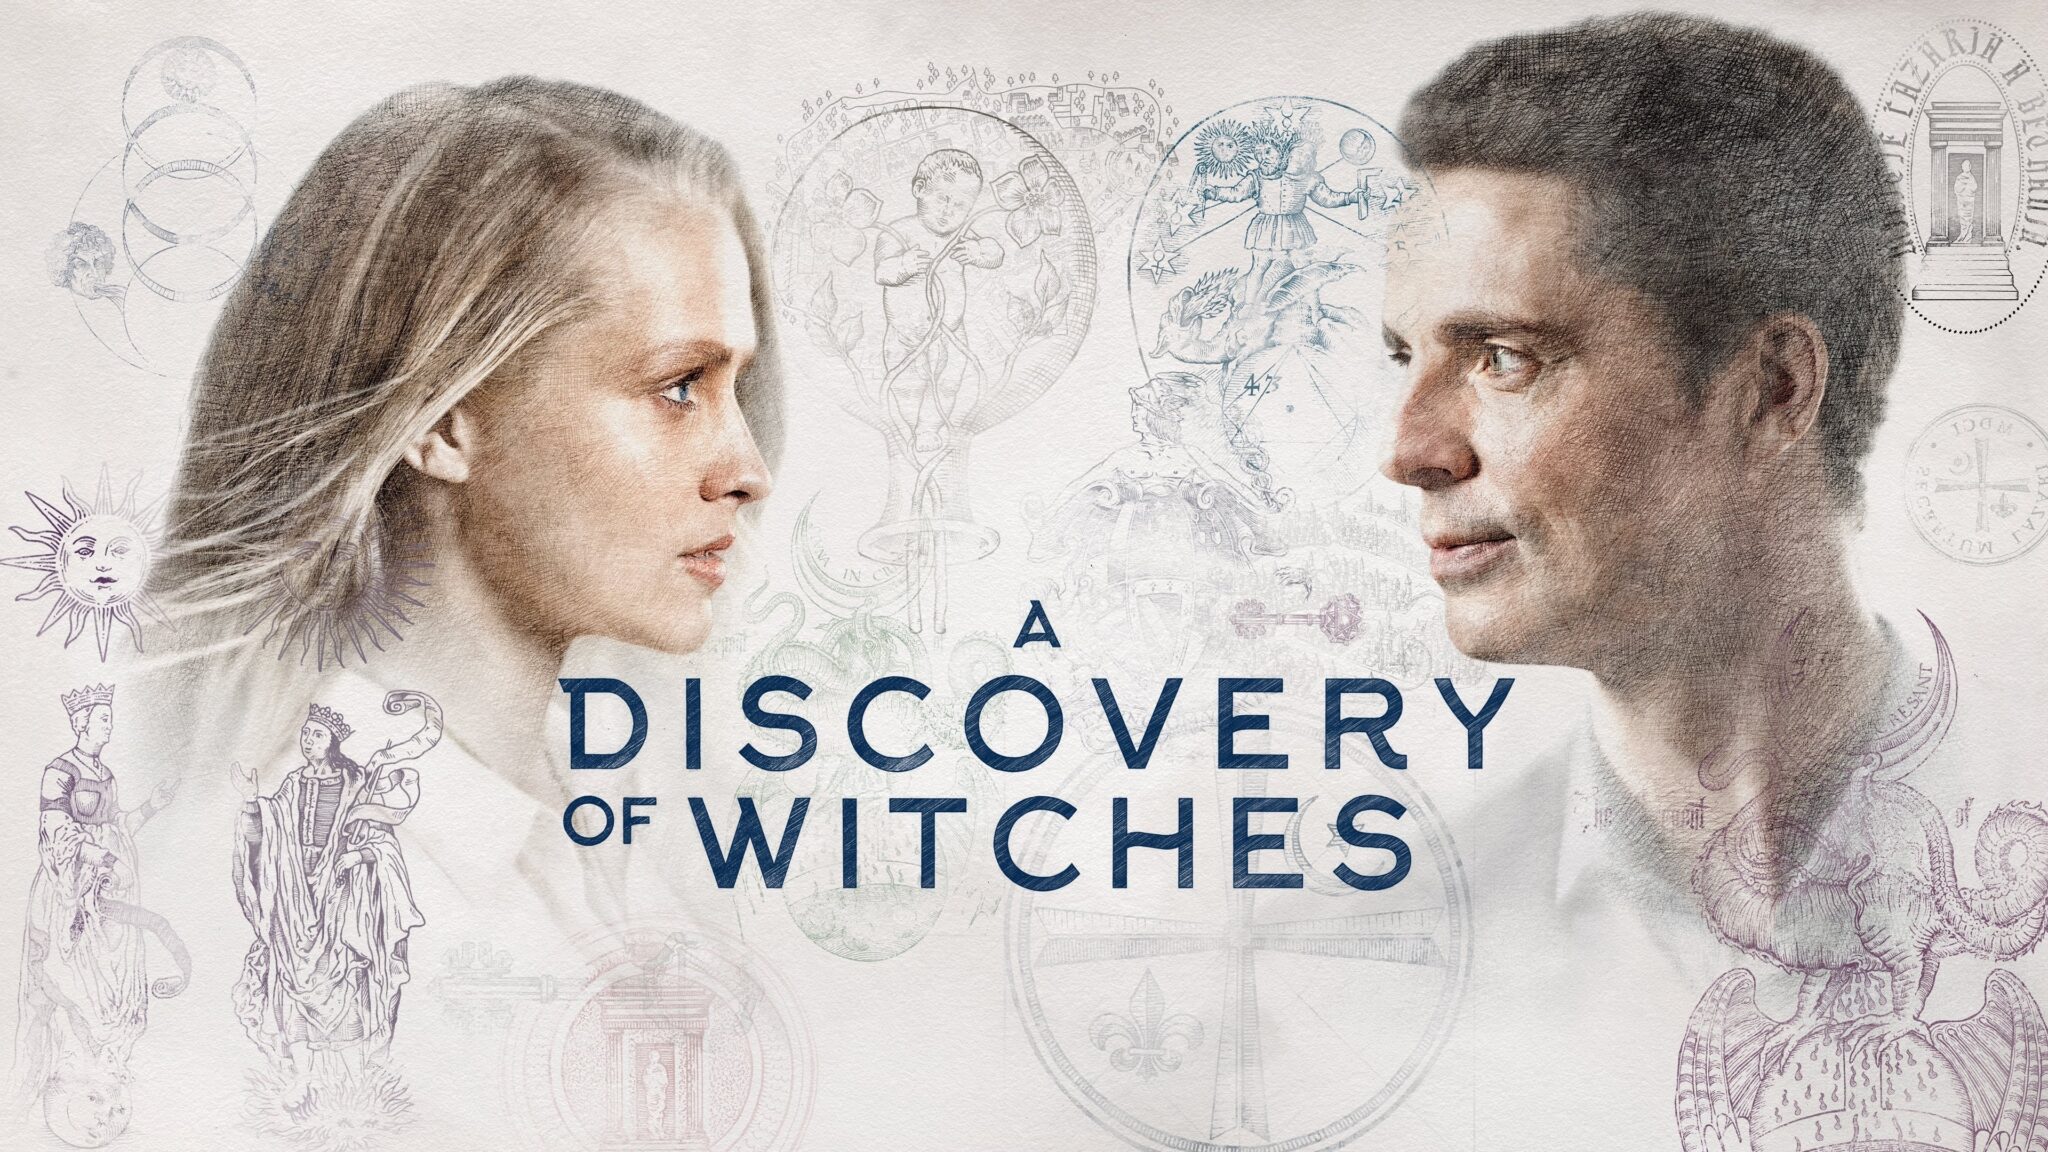 How To Watch Discovery Of Witches Season 2 For Free 'A Discovery of Witches' season 2 episode 1 - Release Date, Watch